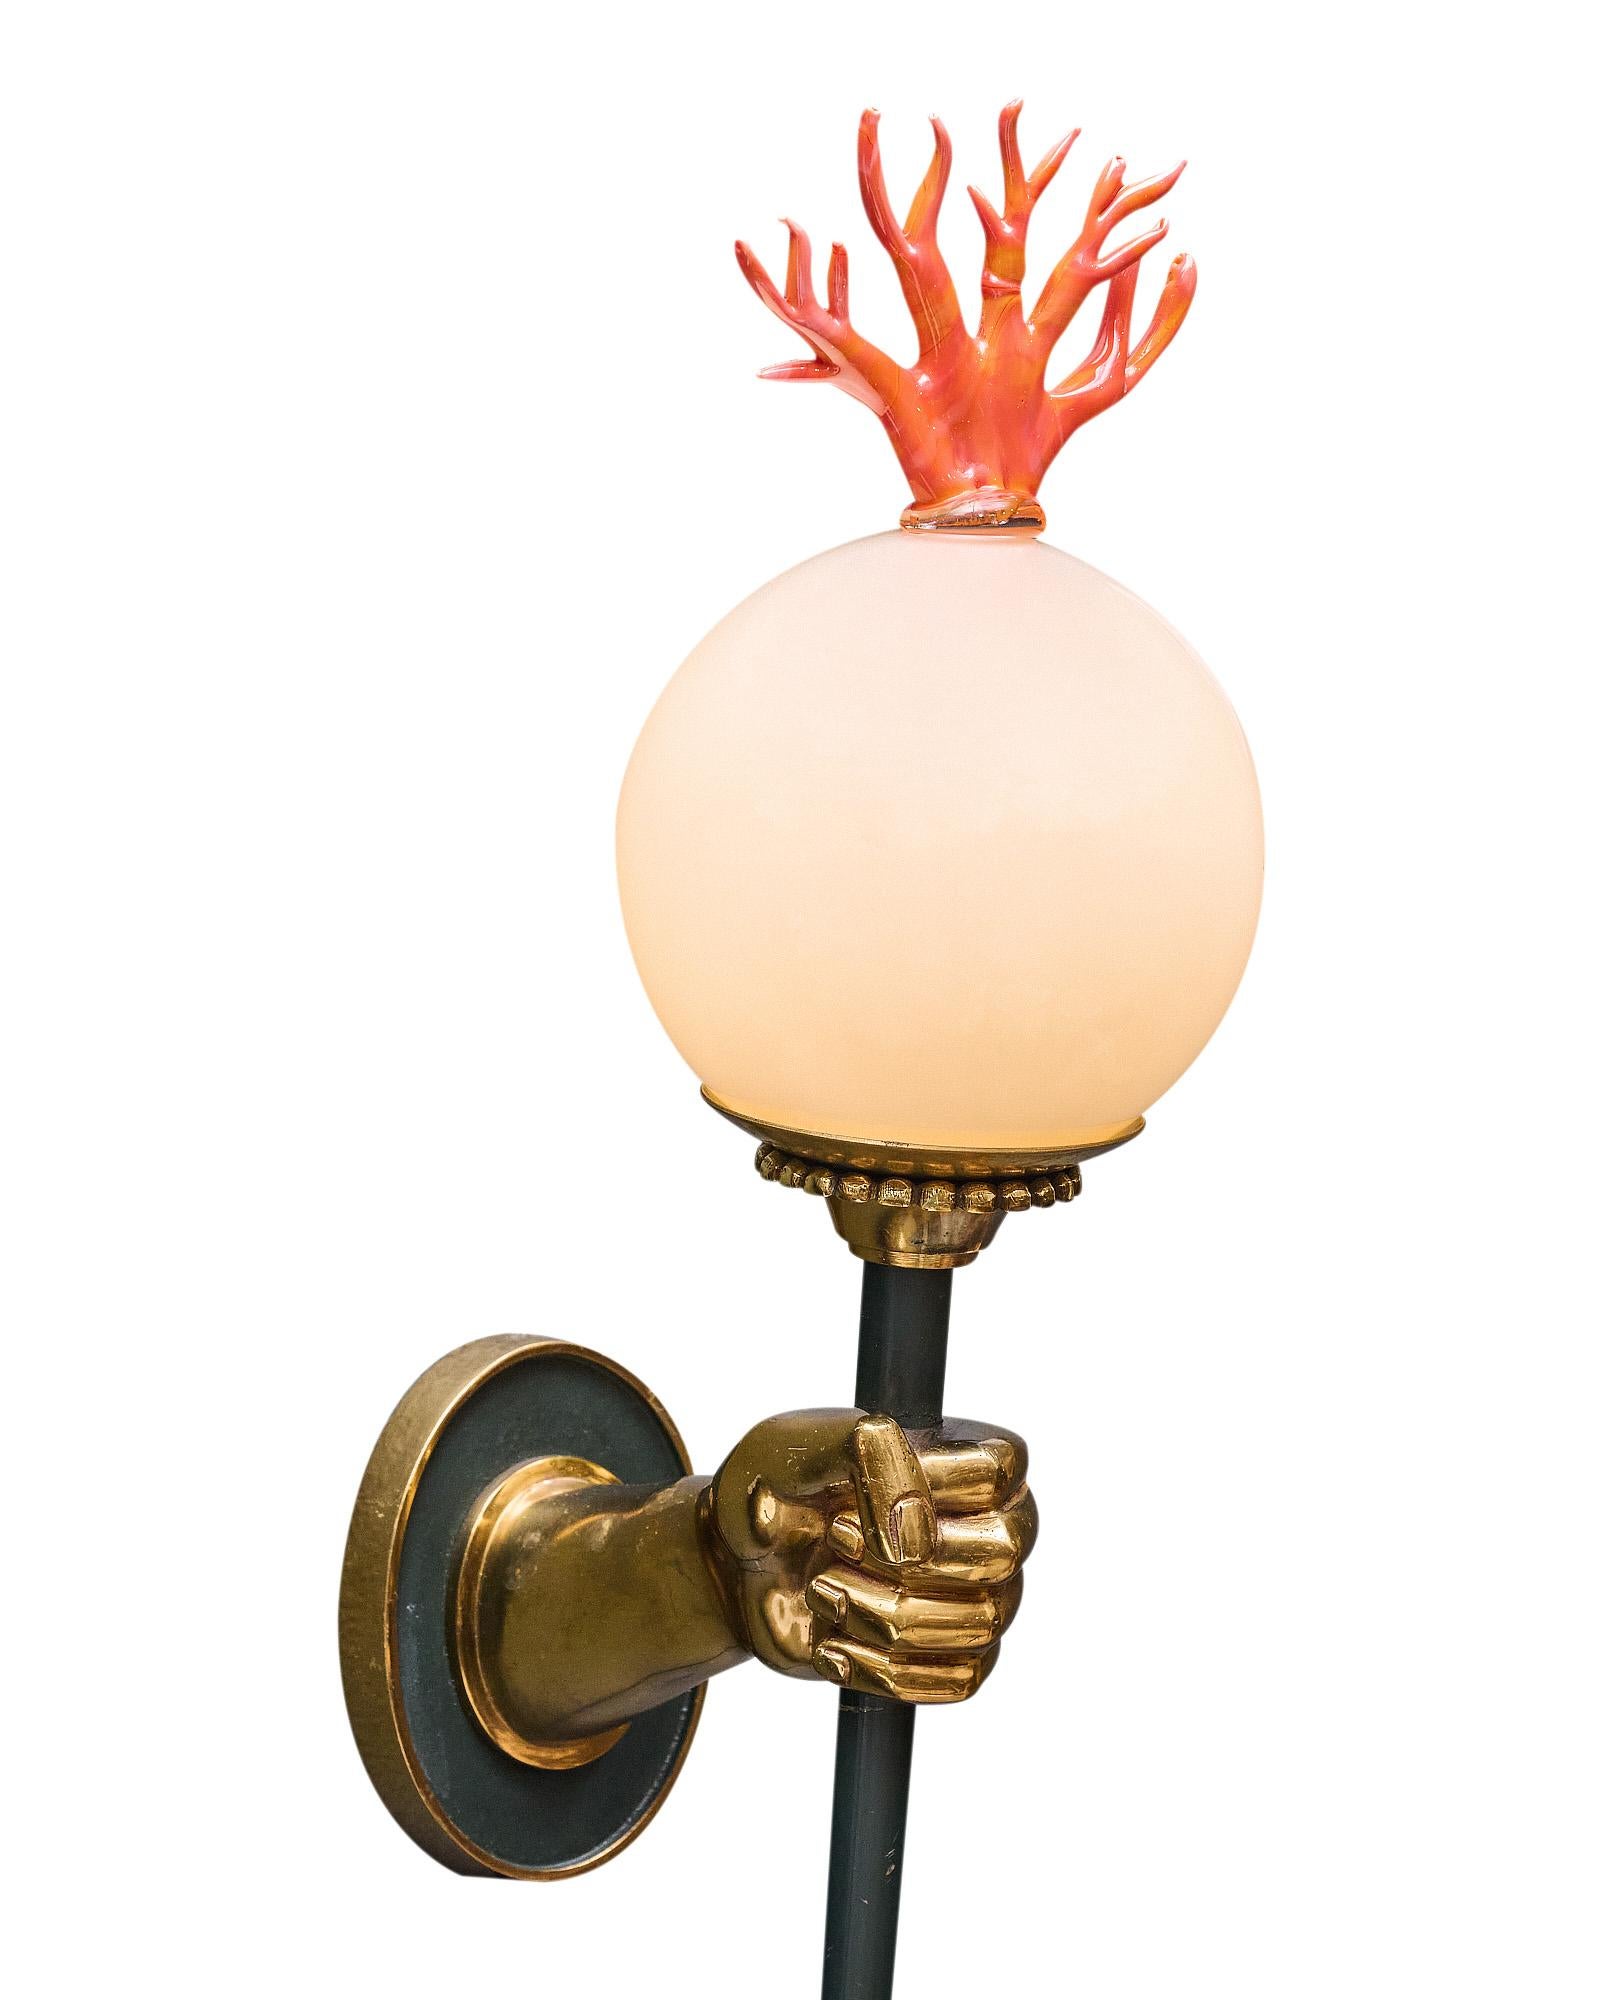 Pair of sconces from Venice, Italy with an Empire style structure of hands holding a torch. The structures are made of solid brass. At the top is a hand-blown Murano glass orb with a glass coral finial. They have been newly wired to fit US standards.